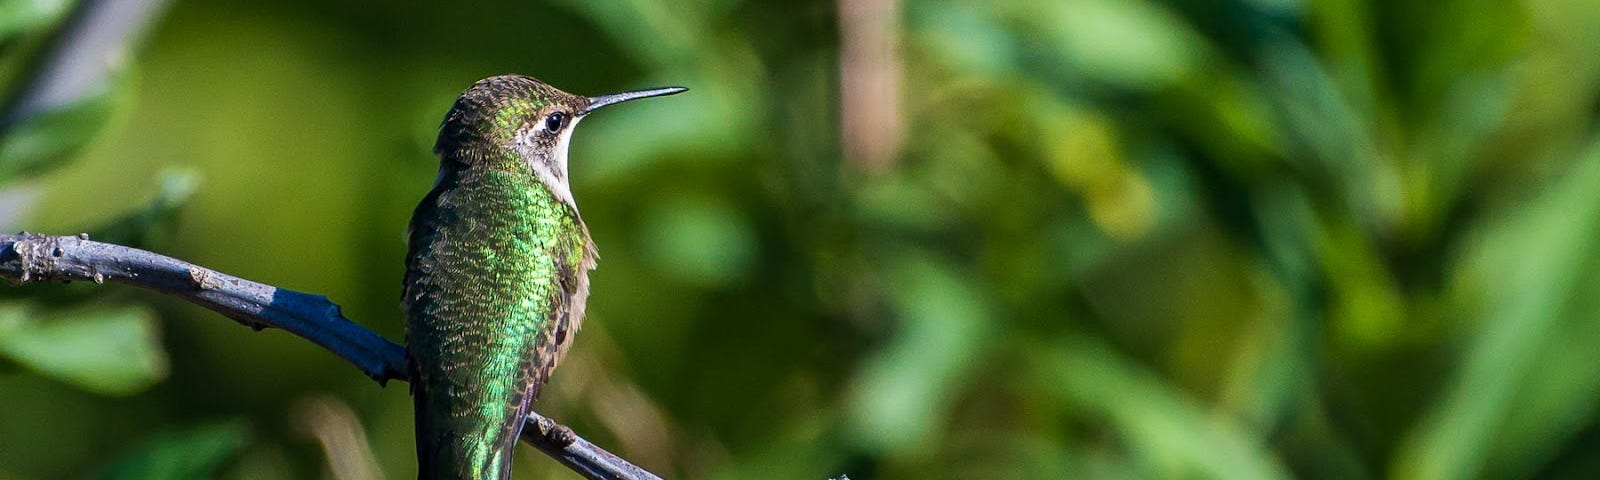 Ruby-throated hummingbird, photographed by the author in his backyard in summer 2021.